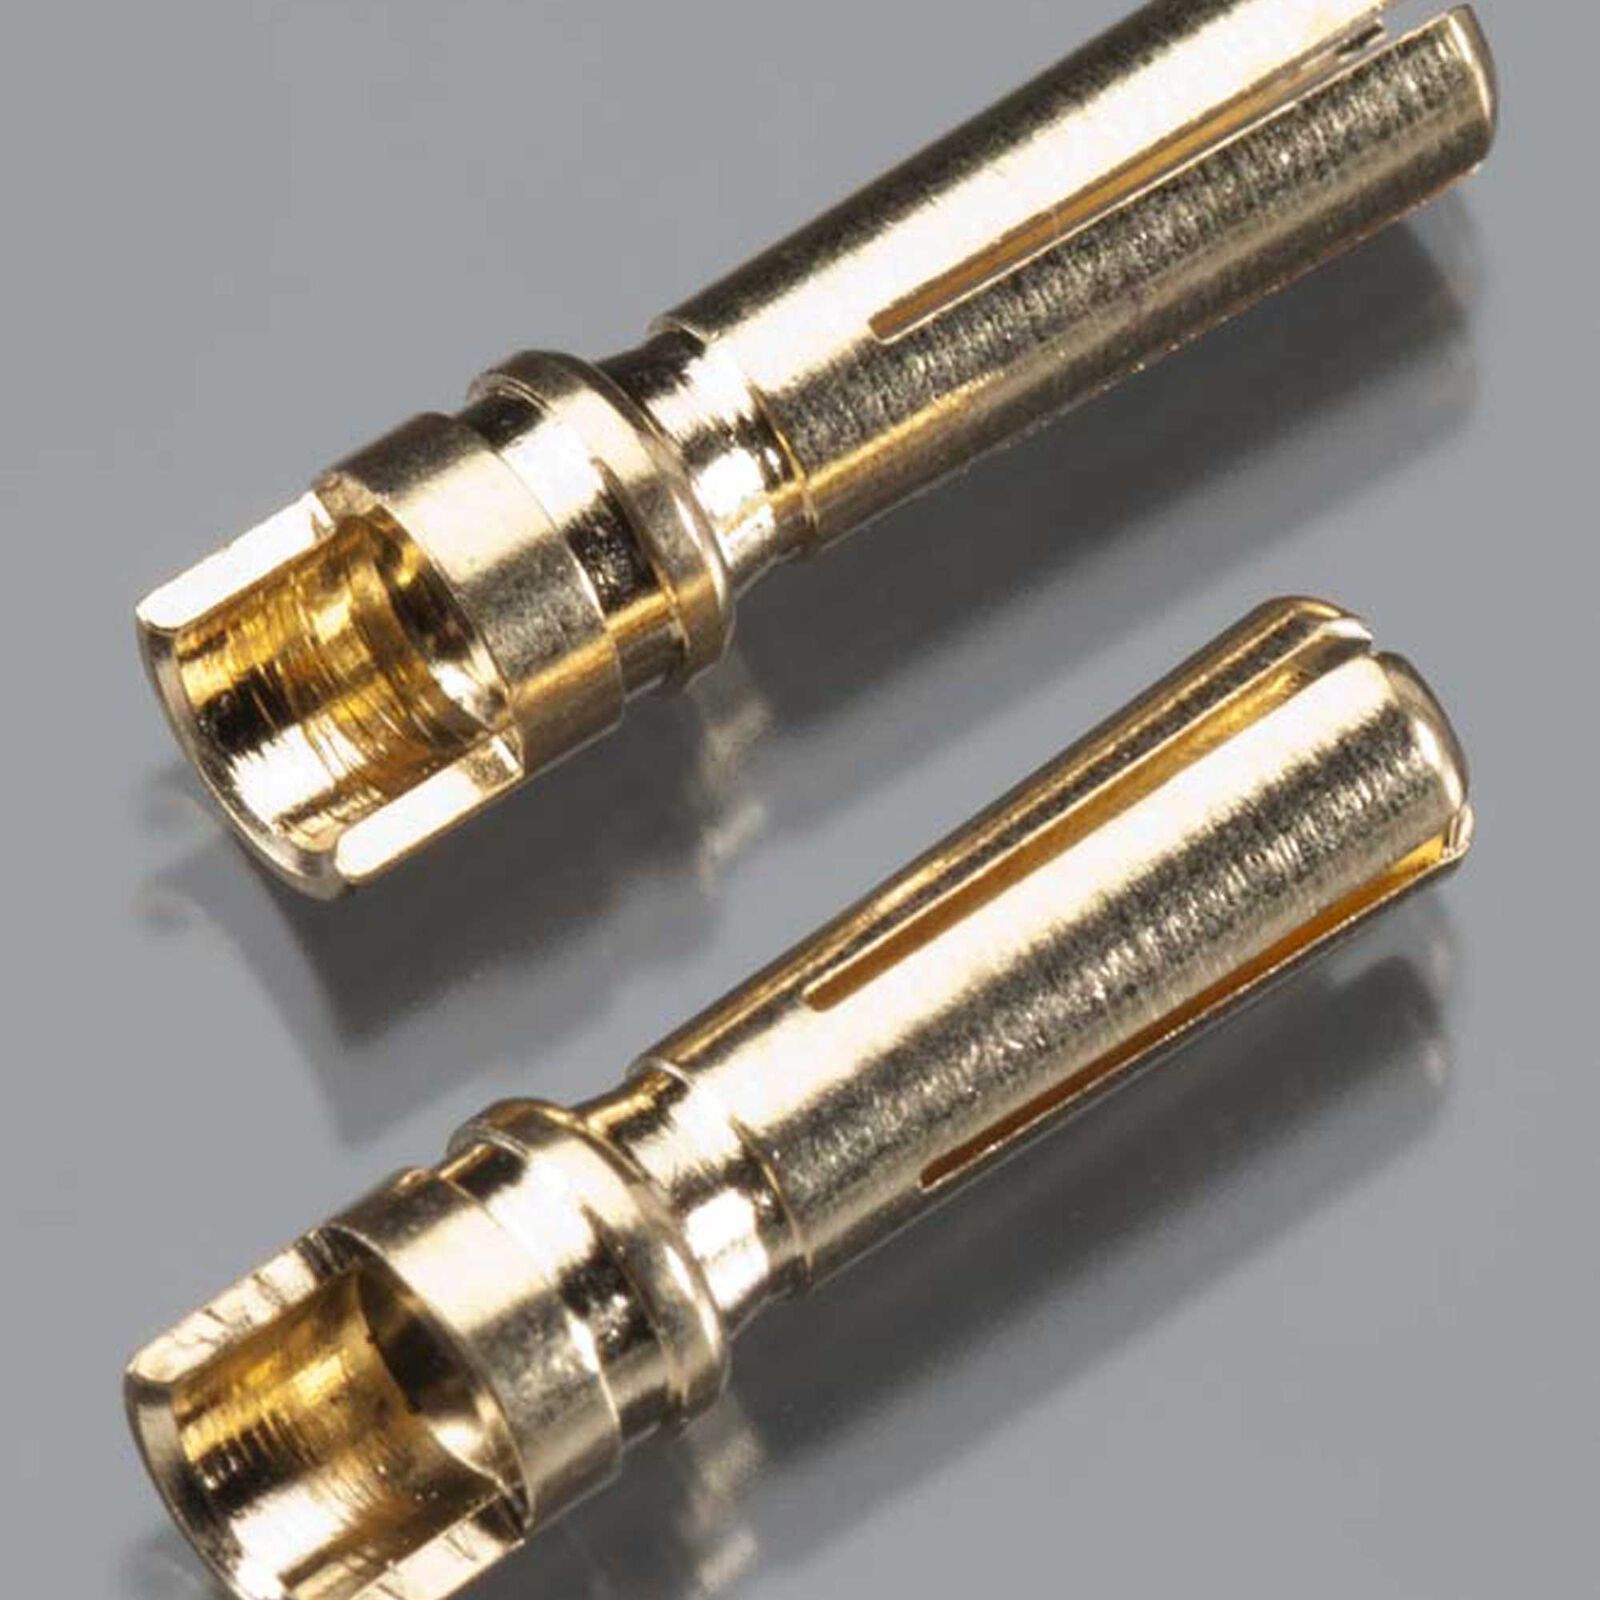 Gold Plated High Current Bullet Connector, 4mm (2)